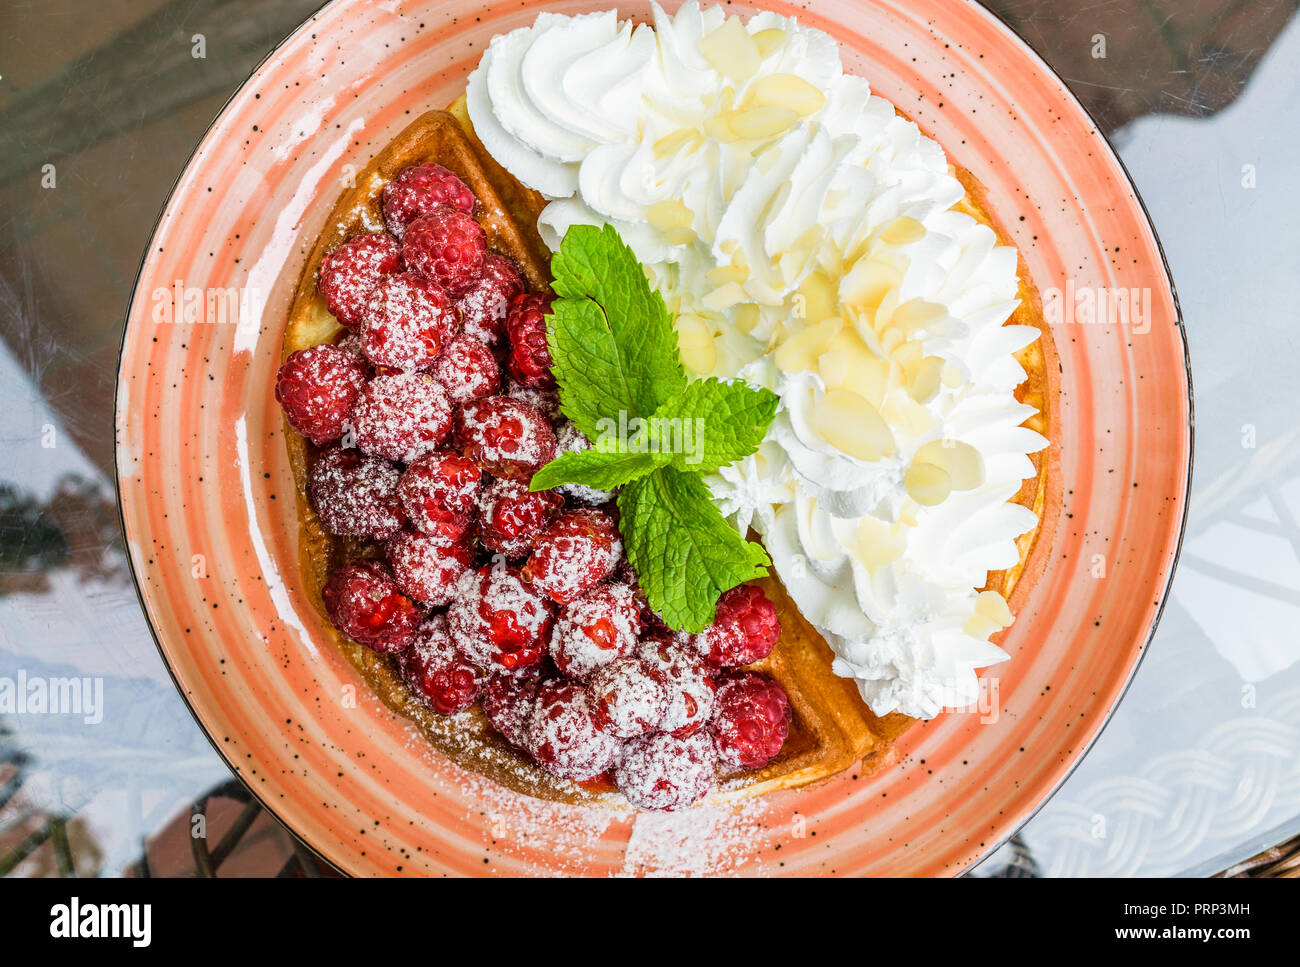 Tasty belgian waffles with fresh raspberries and whipped cream with almond flakes. Decorated with mint leaves and powdered sugar, on orange plate. Del Stock Photo